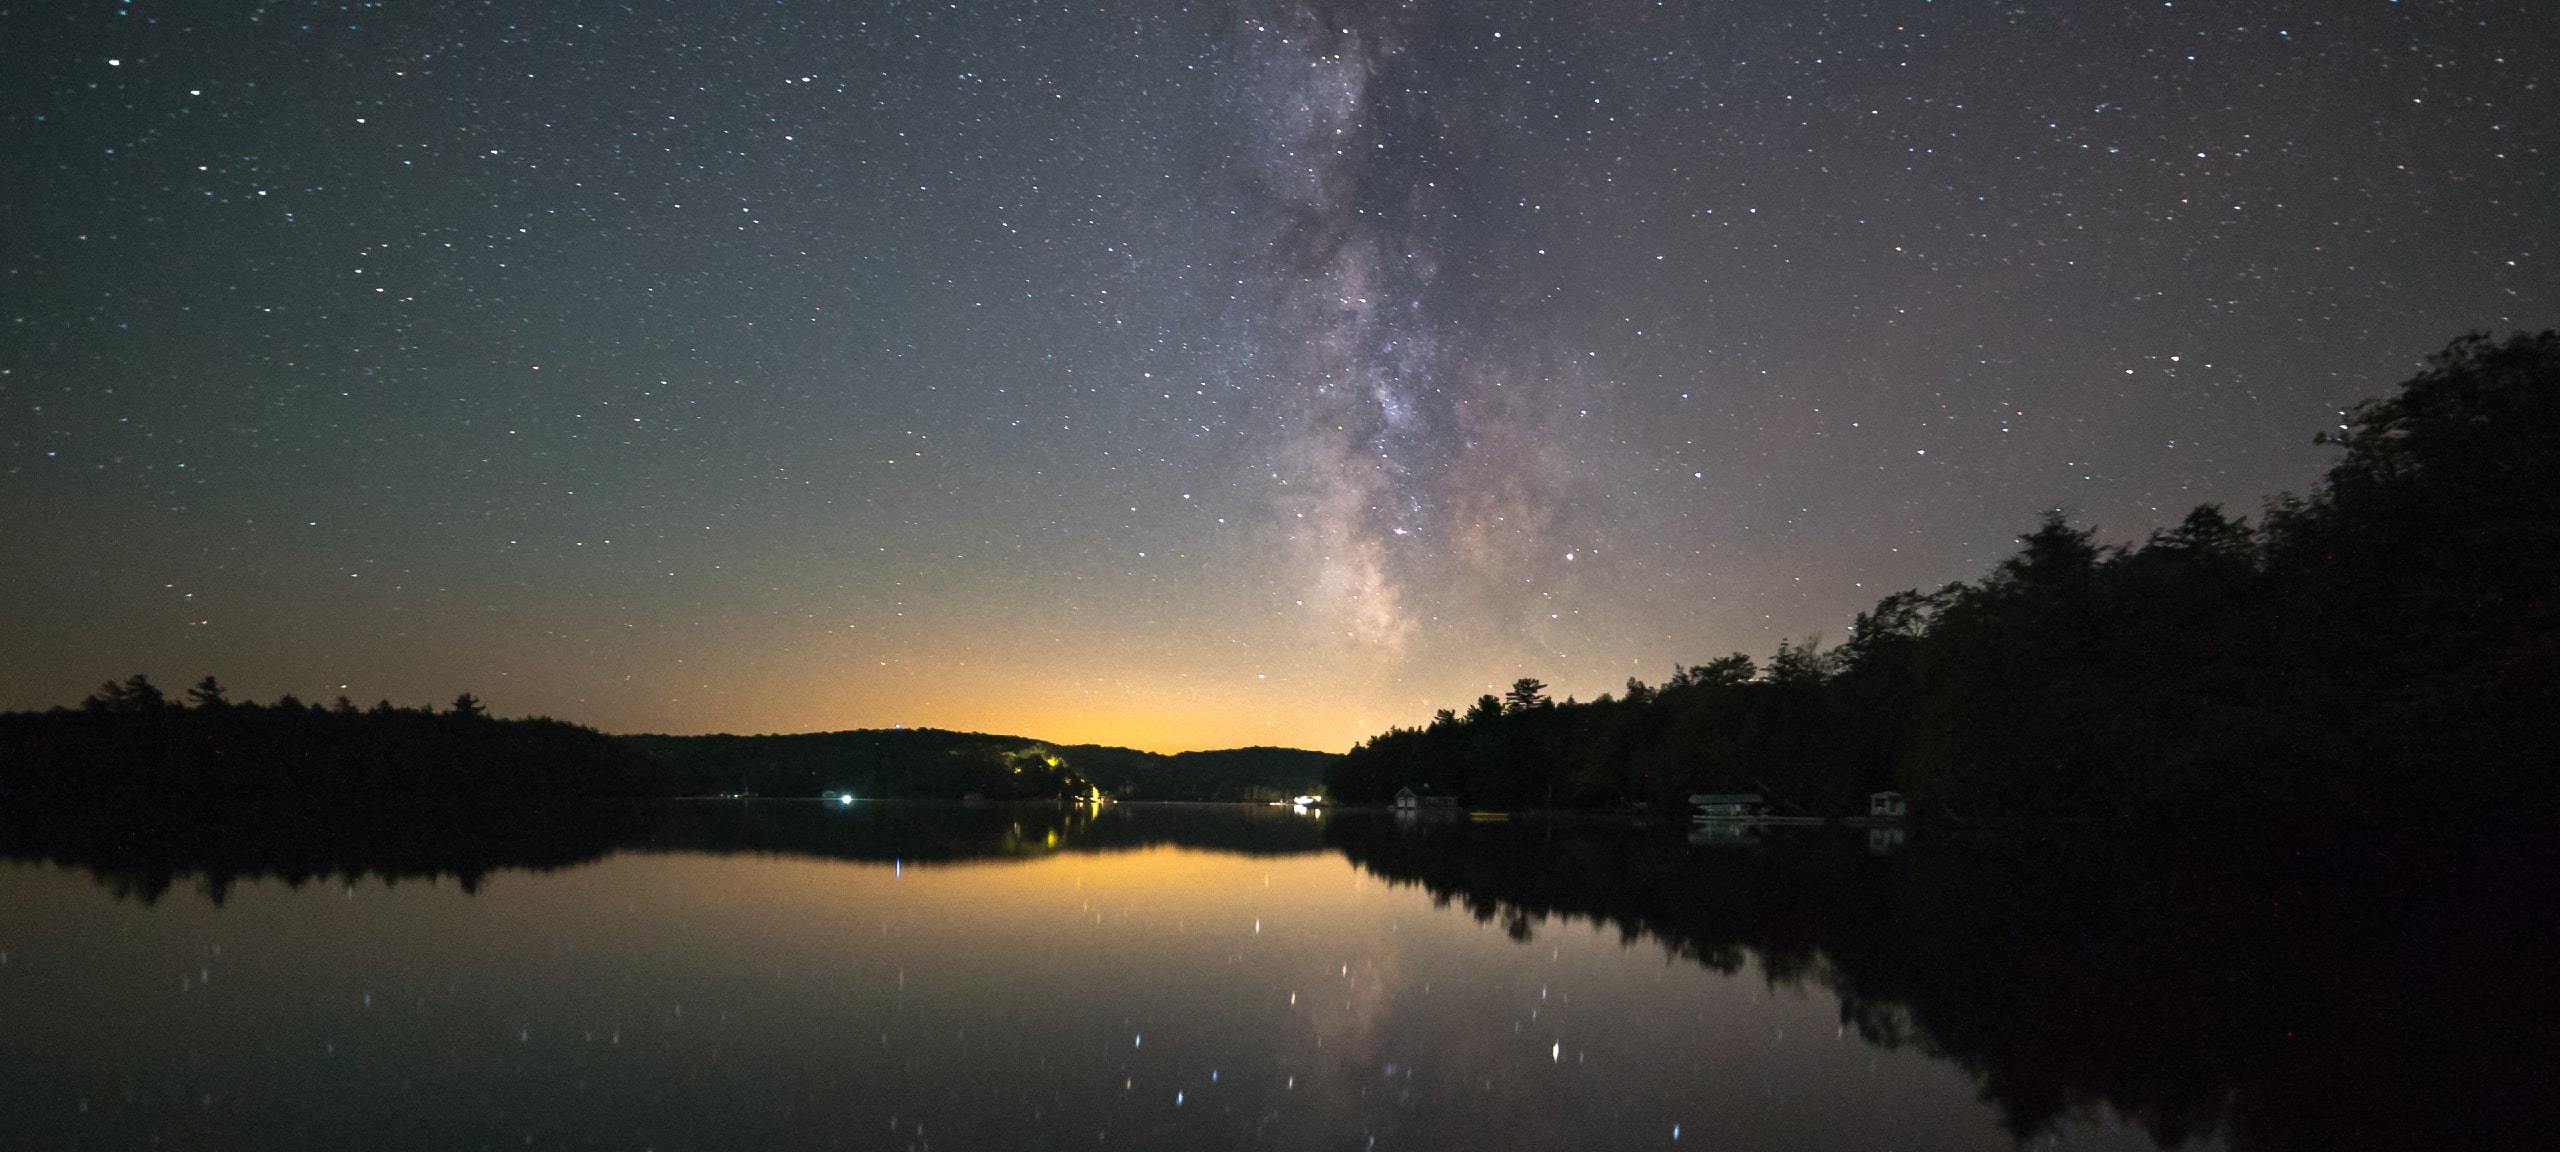 Stars and lake at dusk in Baysville, ON